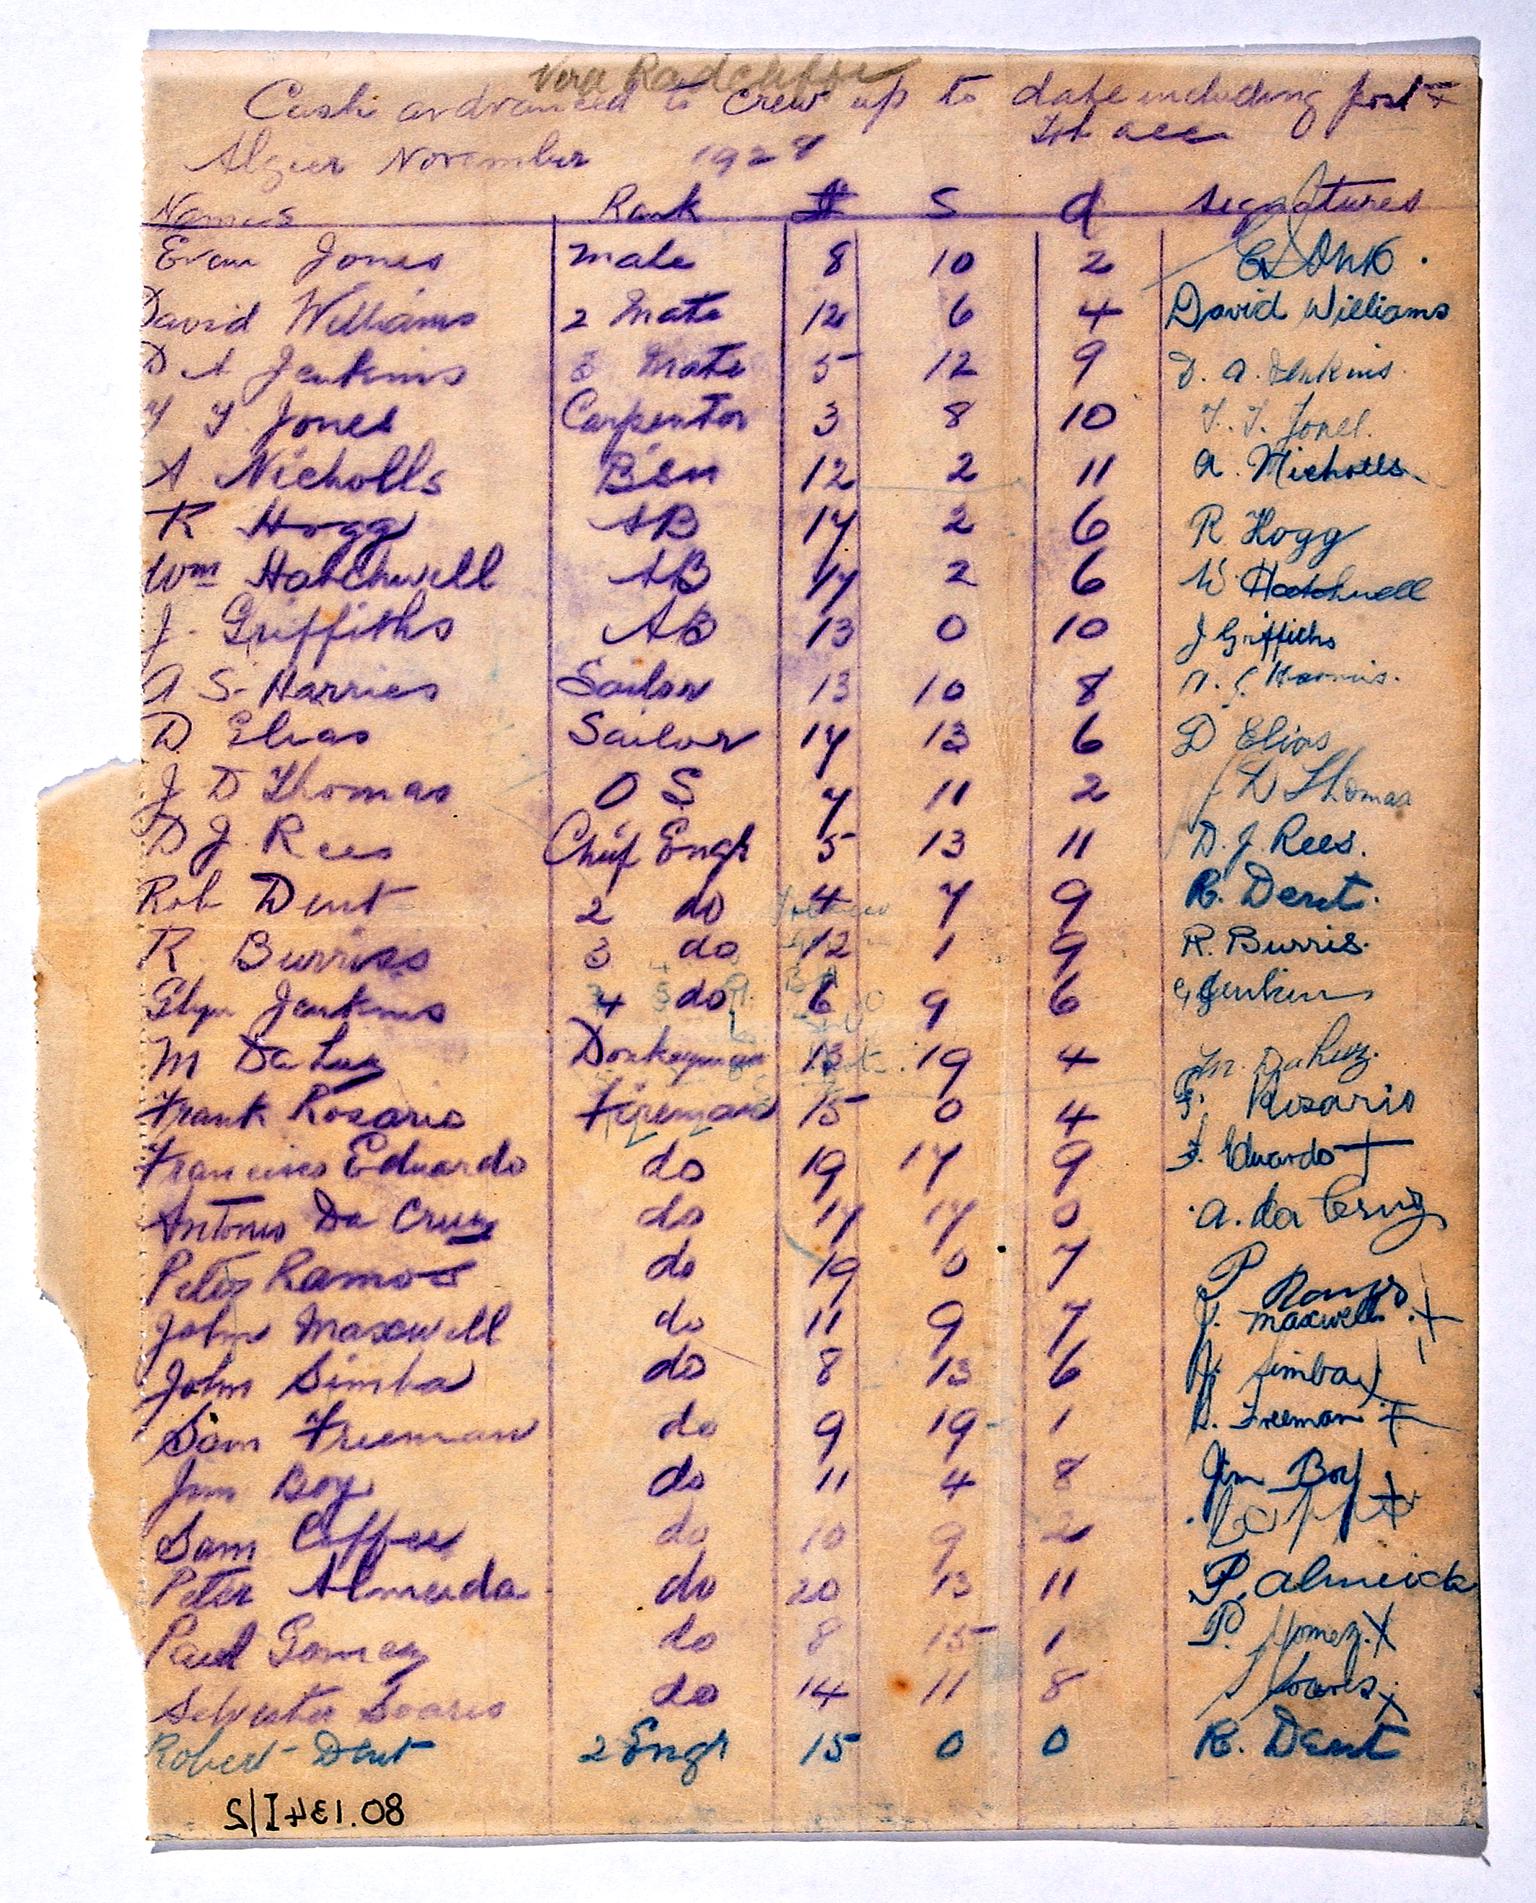 List of crew's pay on the S/S VERA RADCLIFFE